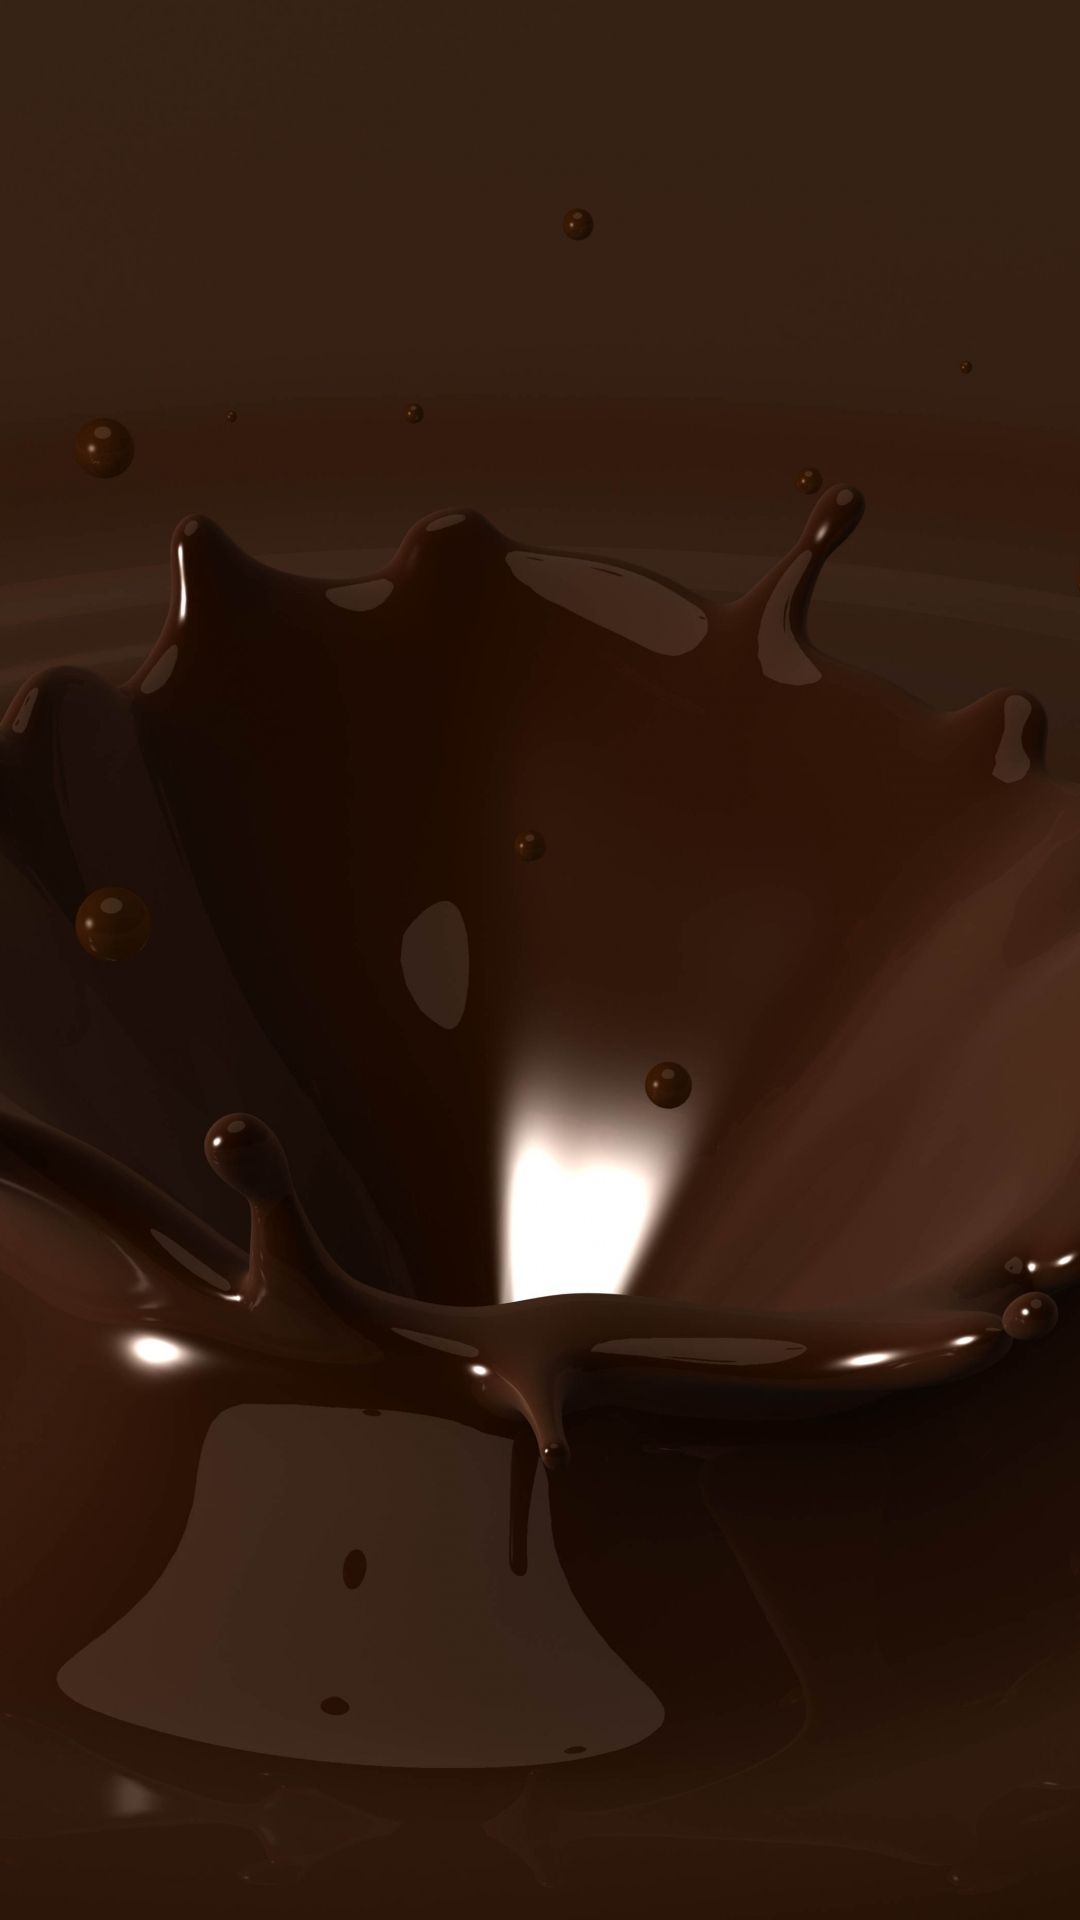 Chocolate Tap To See More Cool Original Wallpaper Mobile9